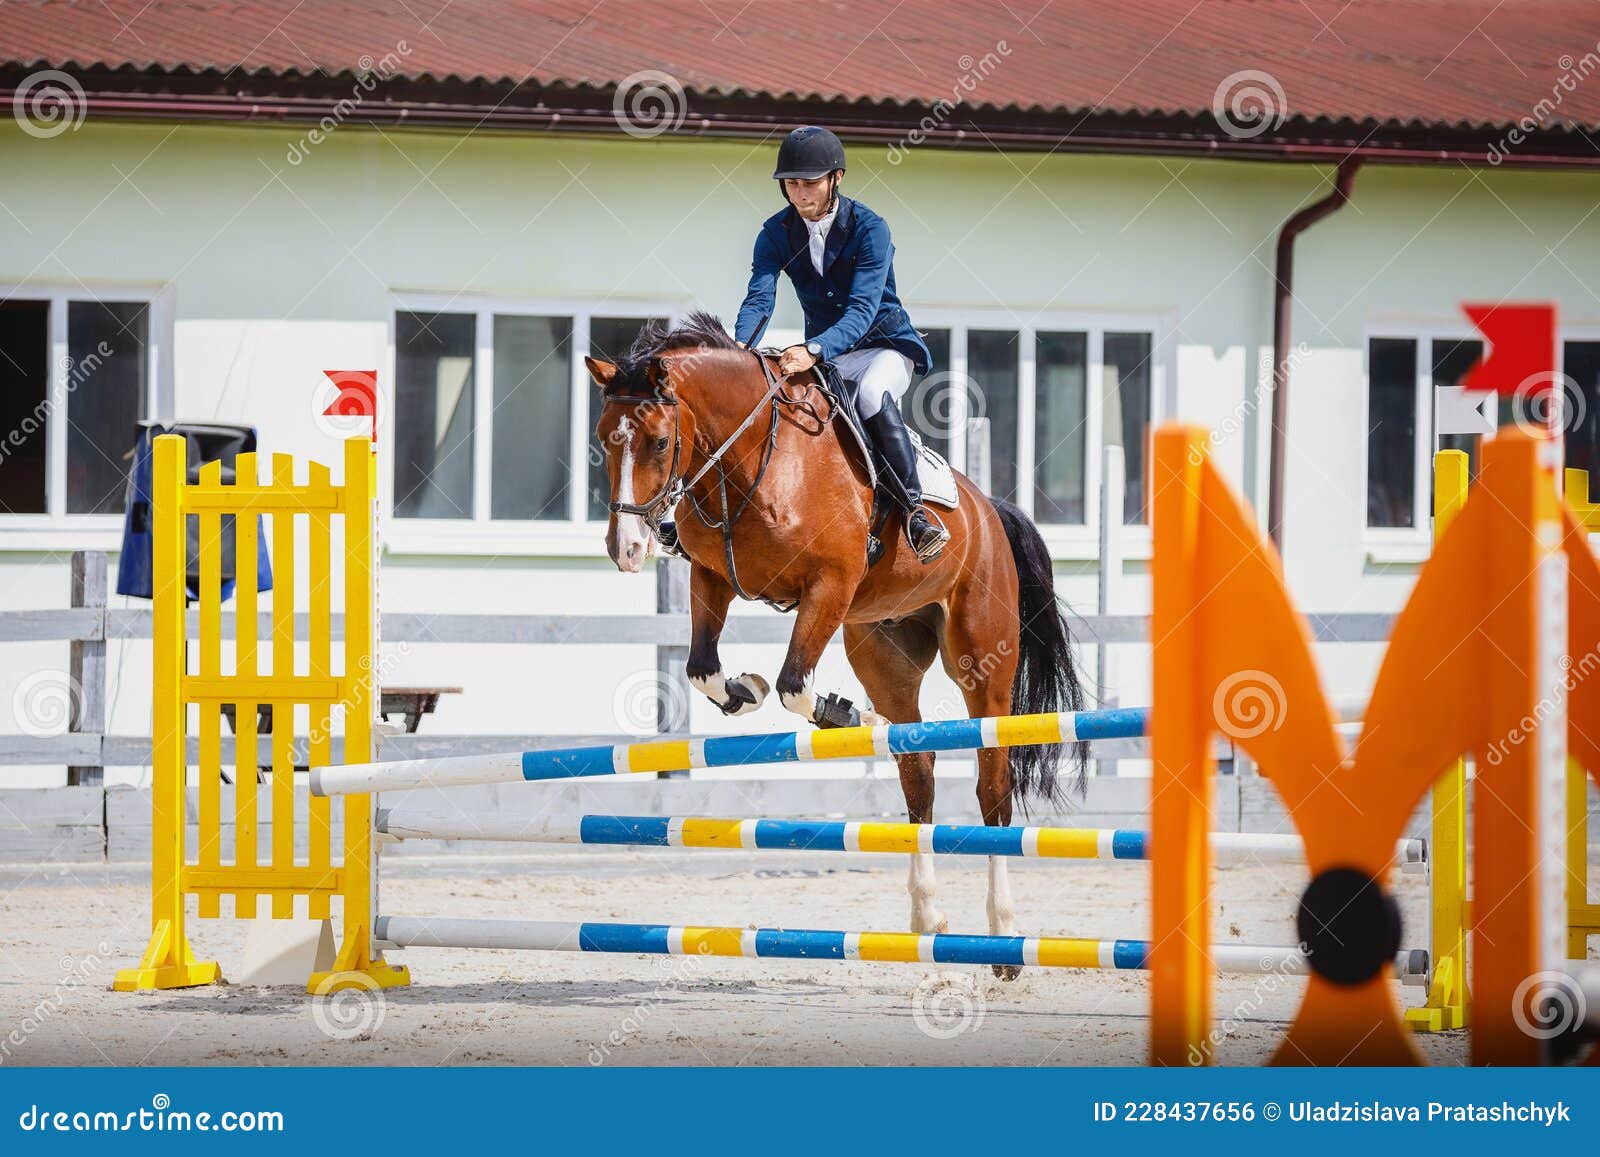 young gelding horse and adult man rider knocked jump pole during equestrian show jumping competition